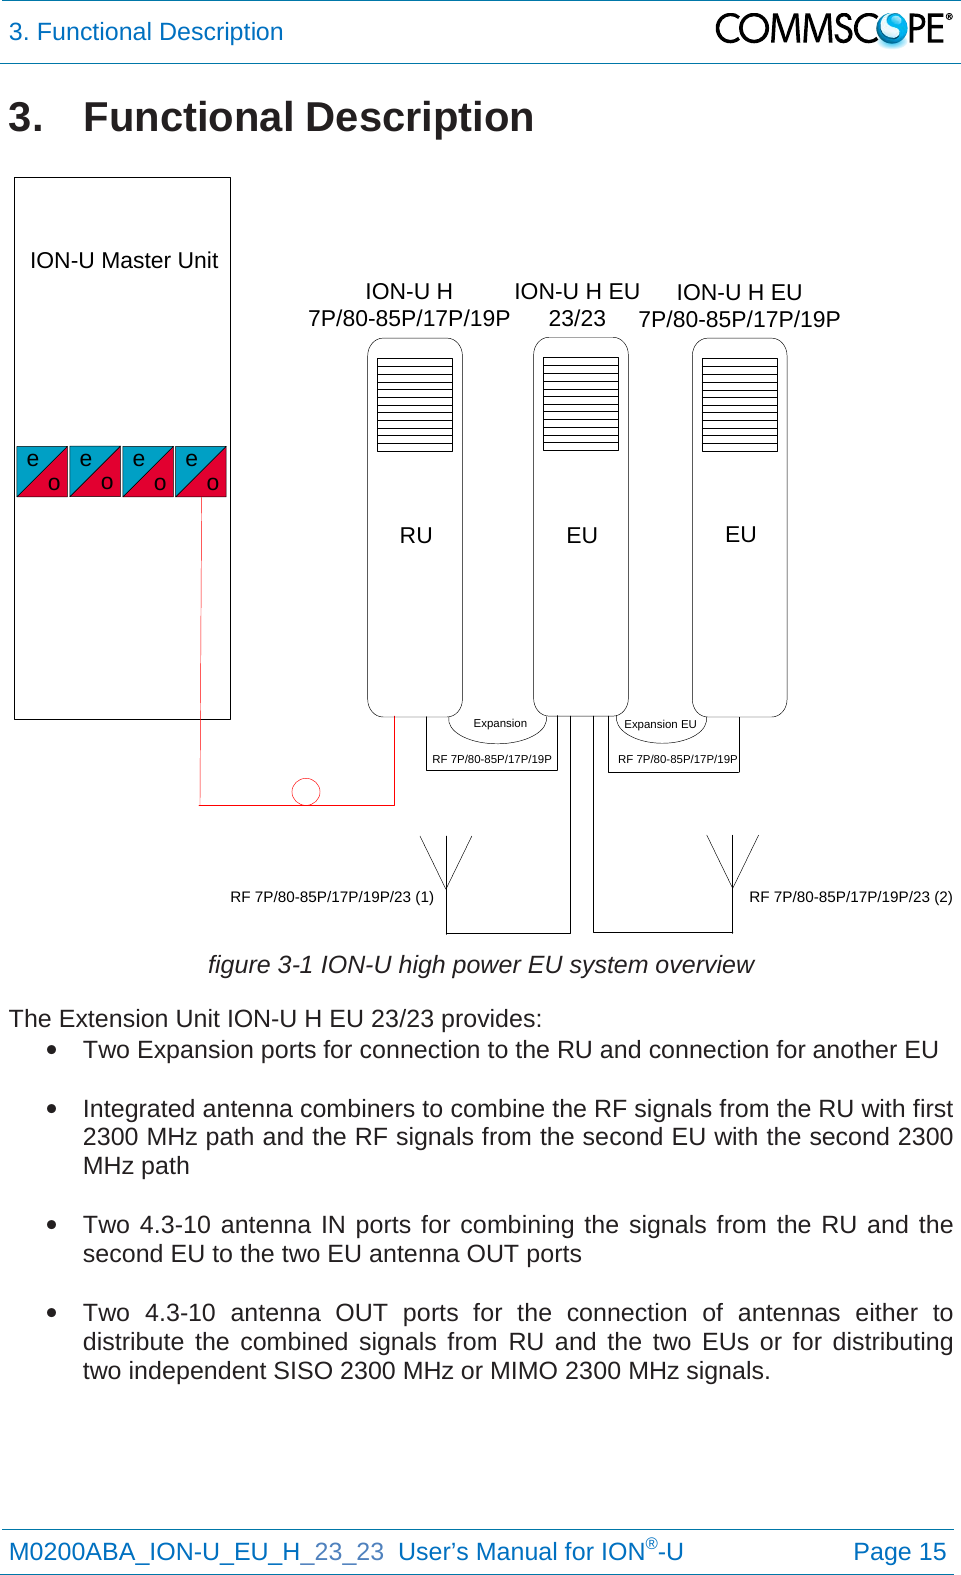 3. Functional Description   M0200ABA_ION-U_EU_H_23_23  User’s Manual for ION®-U  Page 15  3. Functional Description   figure 3-1 ION-U high power EU system overview The Extension Unit ION-U H EU 23/23 provides: • Two Expansion ports for connection to the RU and connection for another EU  • Integrated antenna combiners to combine the RF signals from the RU with first 2300 MHz path and the RF signals from the second EU with the second 2300 MHz path  • Two 4.3-10 antenna IN ports for combining the signals from the RU and the second EU to the two EU antenna OUT ports  • Two 4.3-10 antenna OUT ports for the connection of antennas either to distribute the combined signals from RU and the two EUs or for distributing two independent SISO 2300 MHz or MIMO 2300 MHz signals.    ION-U Master UniteoION-U H7P/80-85P/17P/19P ION-U H EU7P/80-85P/17P/19PION-U H EU 23/23Expansion Expansion EURF 7P/80-85P/17P/19PRF 7P/80-85P/17P/19P/23 (1) RF 7P/80-85P/17P/19P/23 (2)RF 7P/80-85P/17P/19PeoeoeoRU EU EU